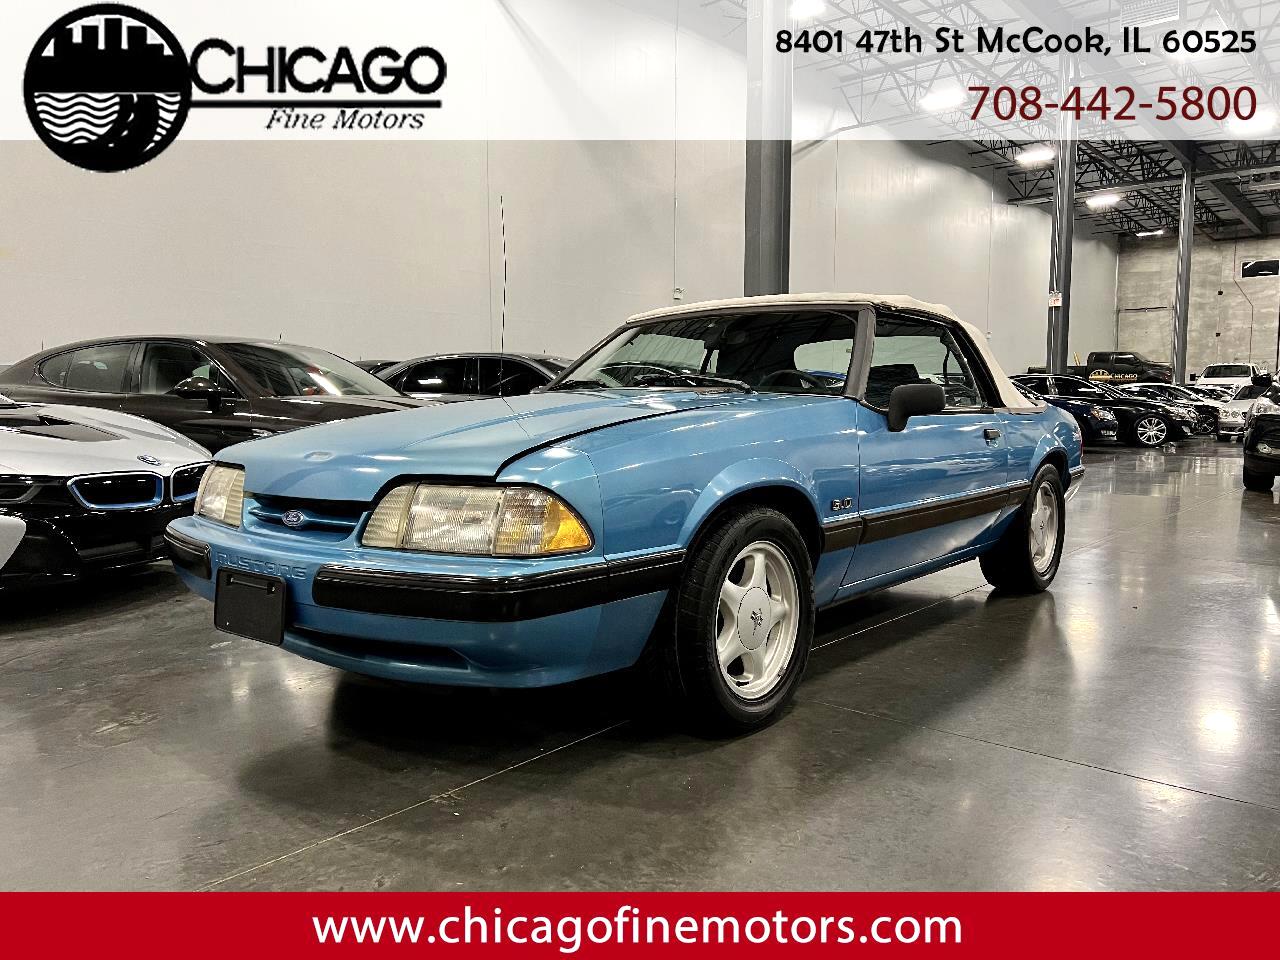 Ford Mustang LX 5.0L convertible 1991